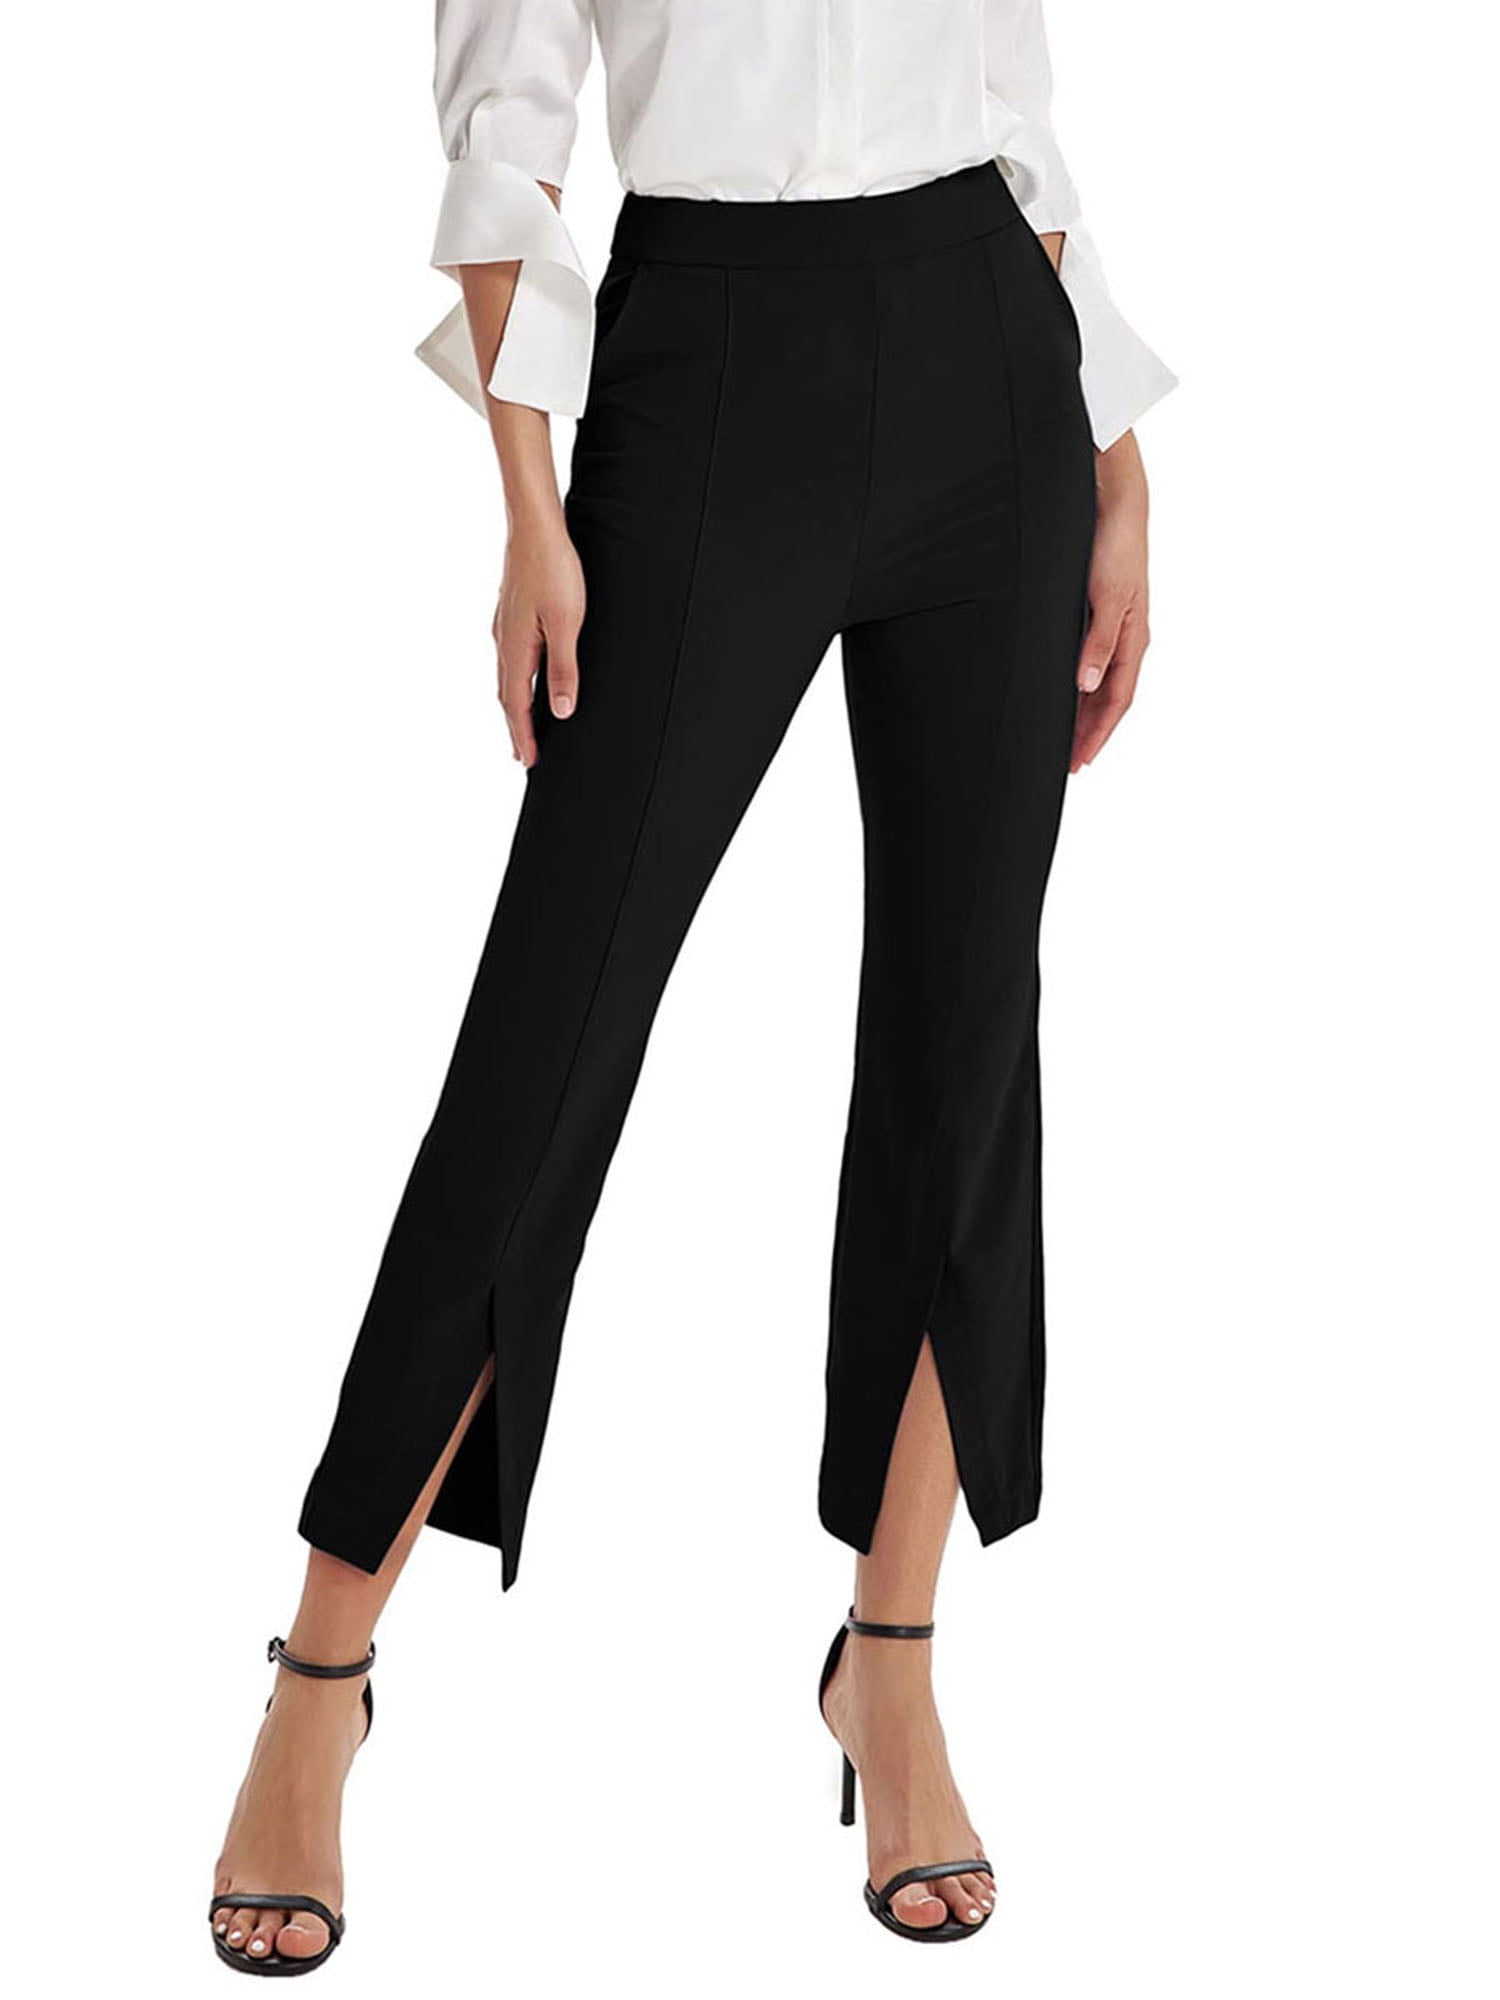 Strictly Business Black High Waisted Trouser Pants  Business casual  outfits for work, Stylish work outfits, Business outfits women